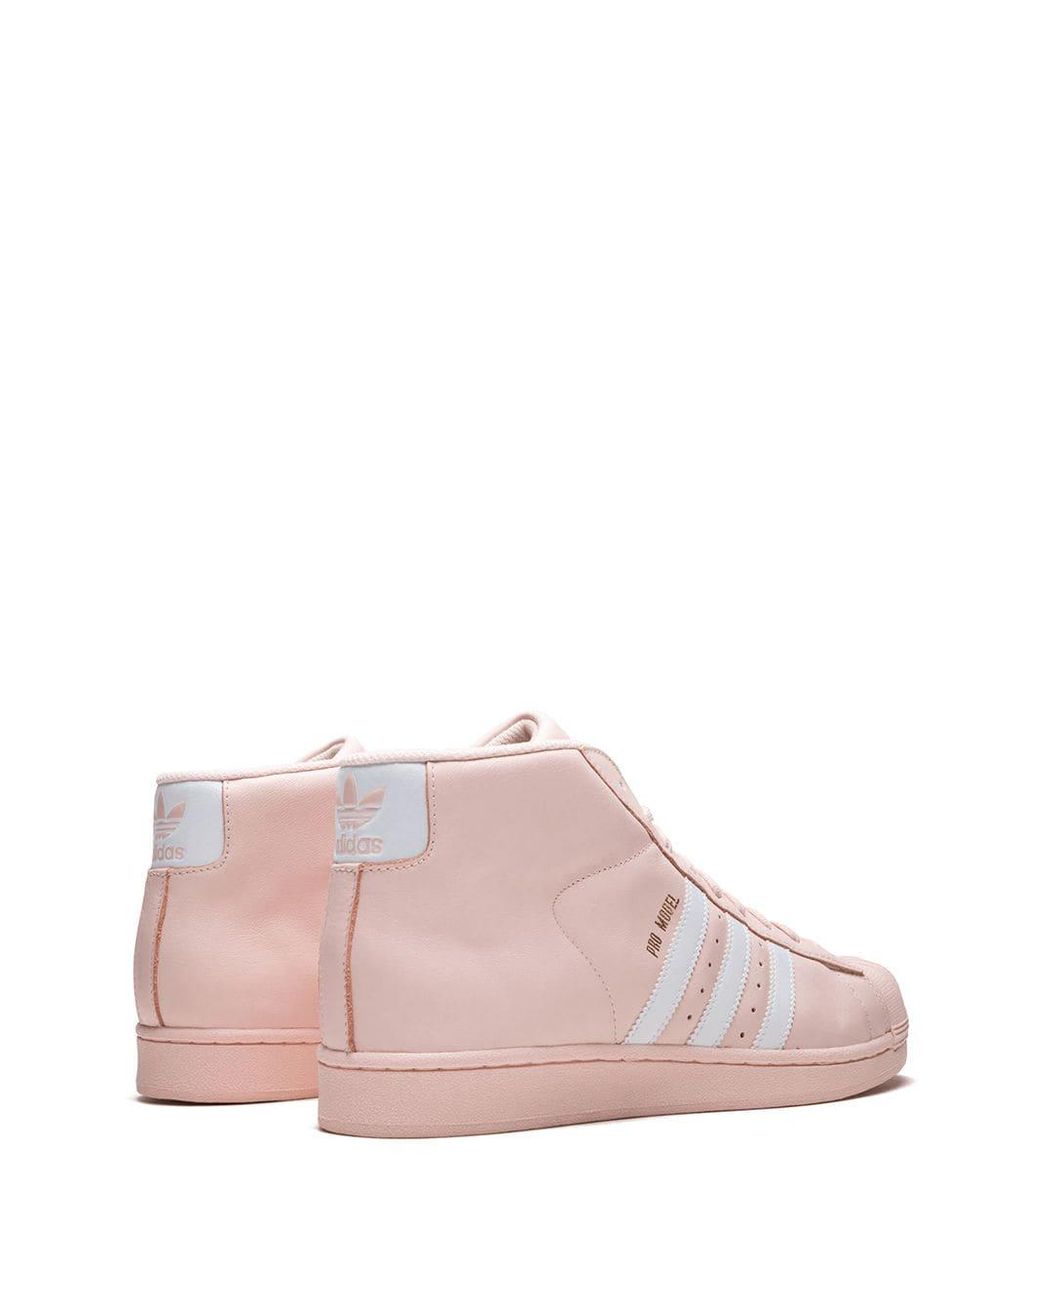 adidas Leather Pro Model High Top Sneakers in Pink for Men | Lyst